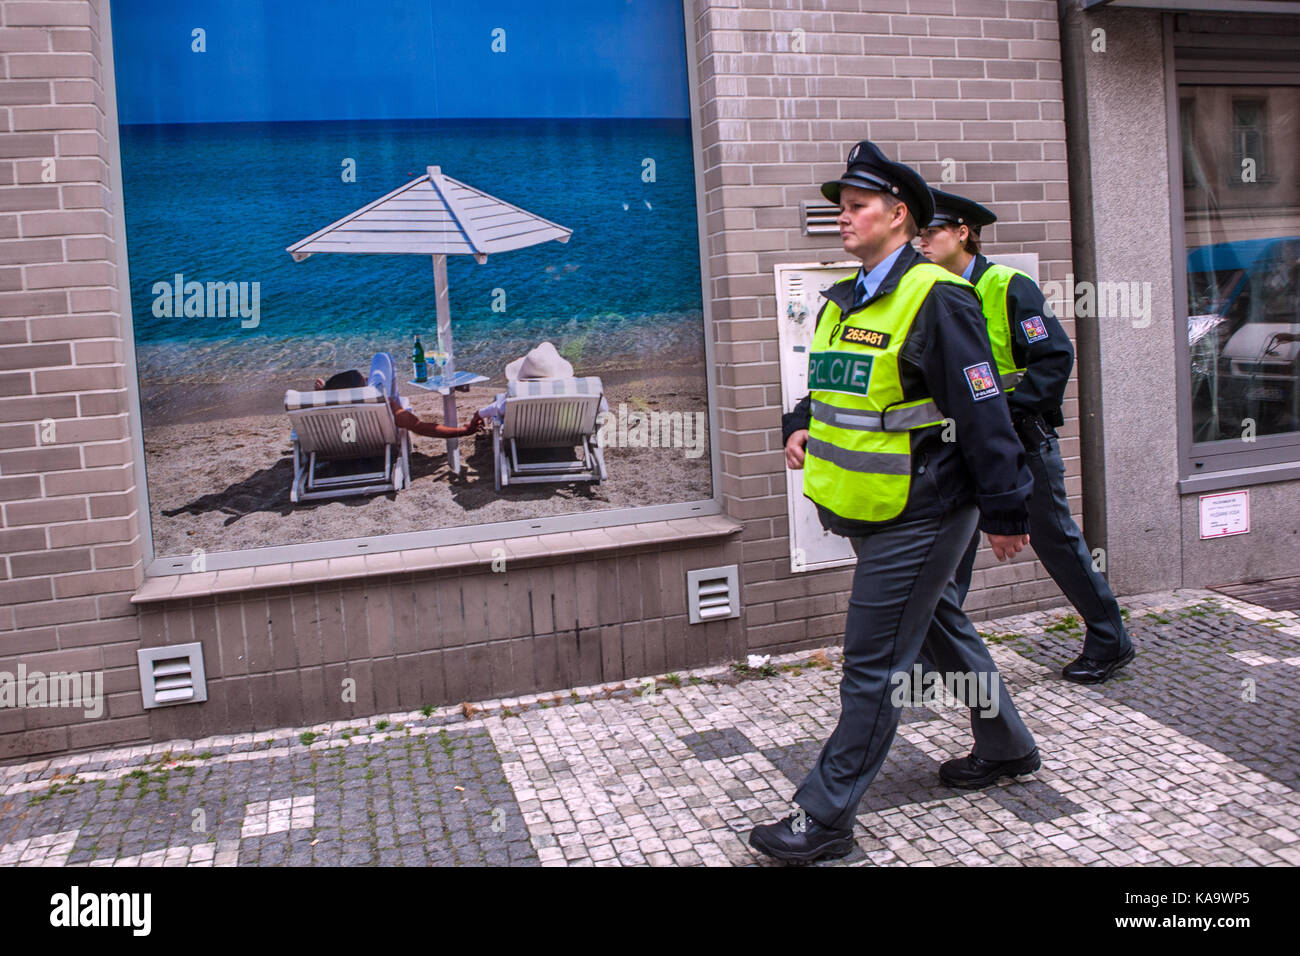 Czech police patrolling the street, they pass by a poster for a great holiday in a shop window Prague Czech Republic Stock Photo